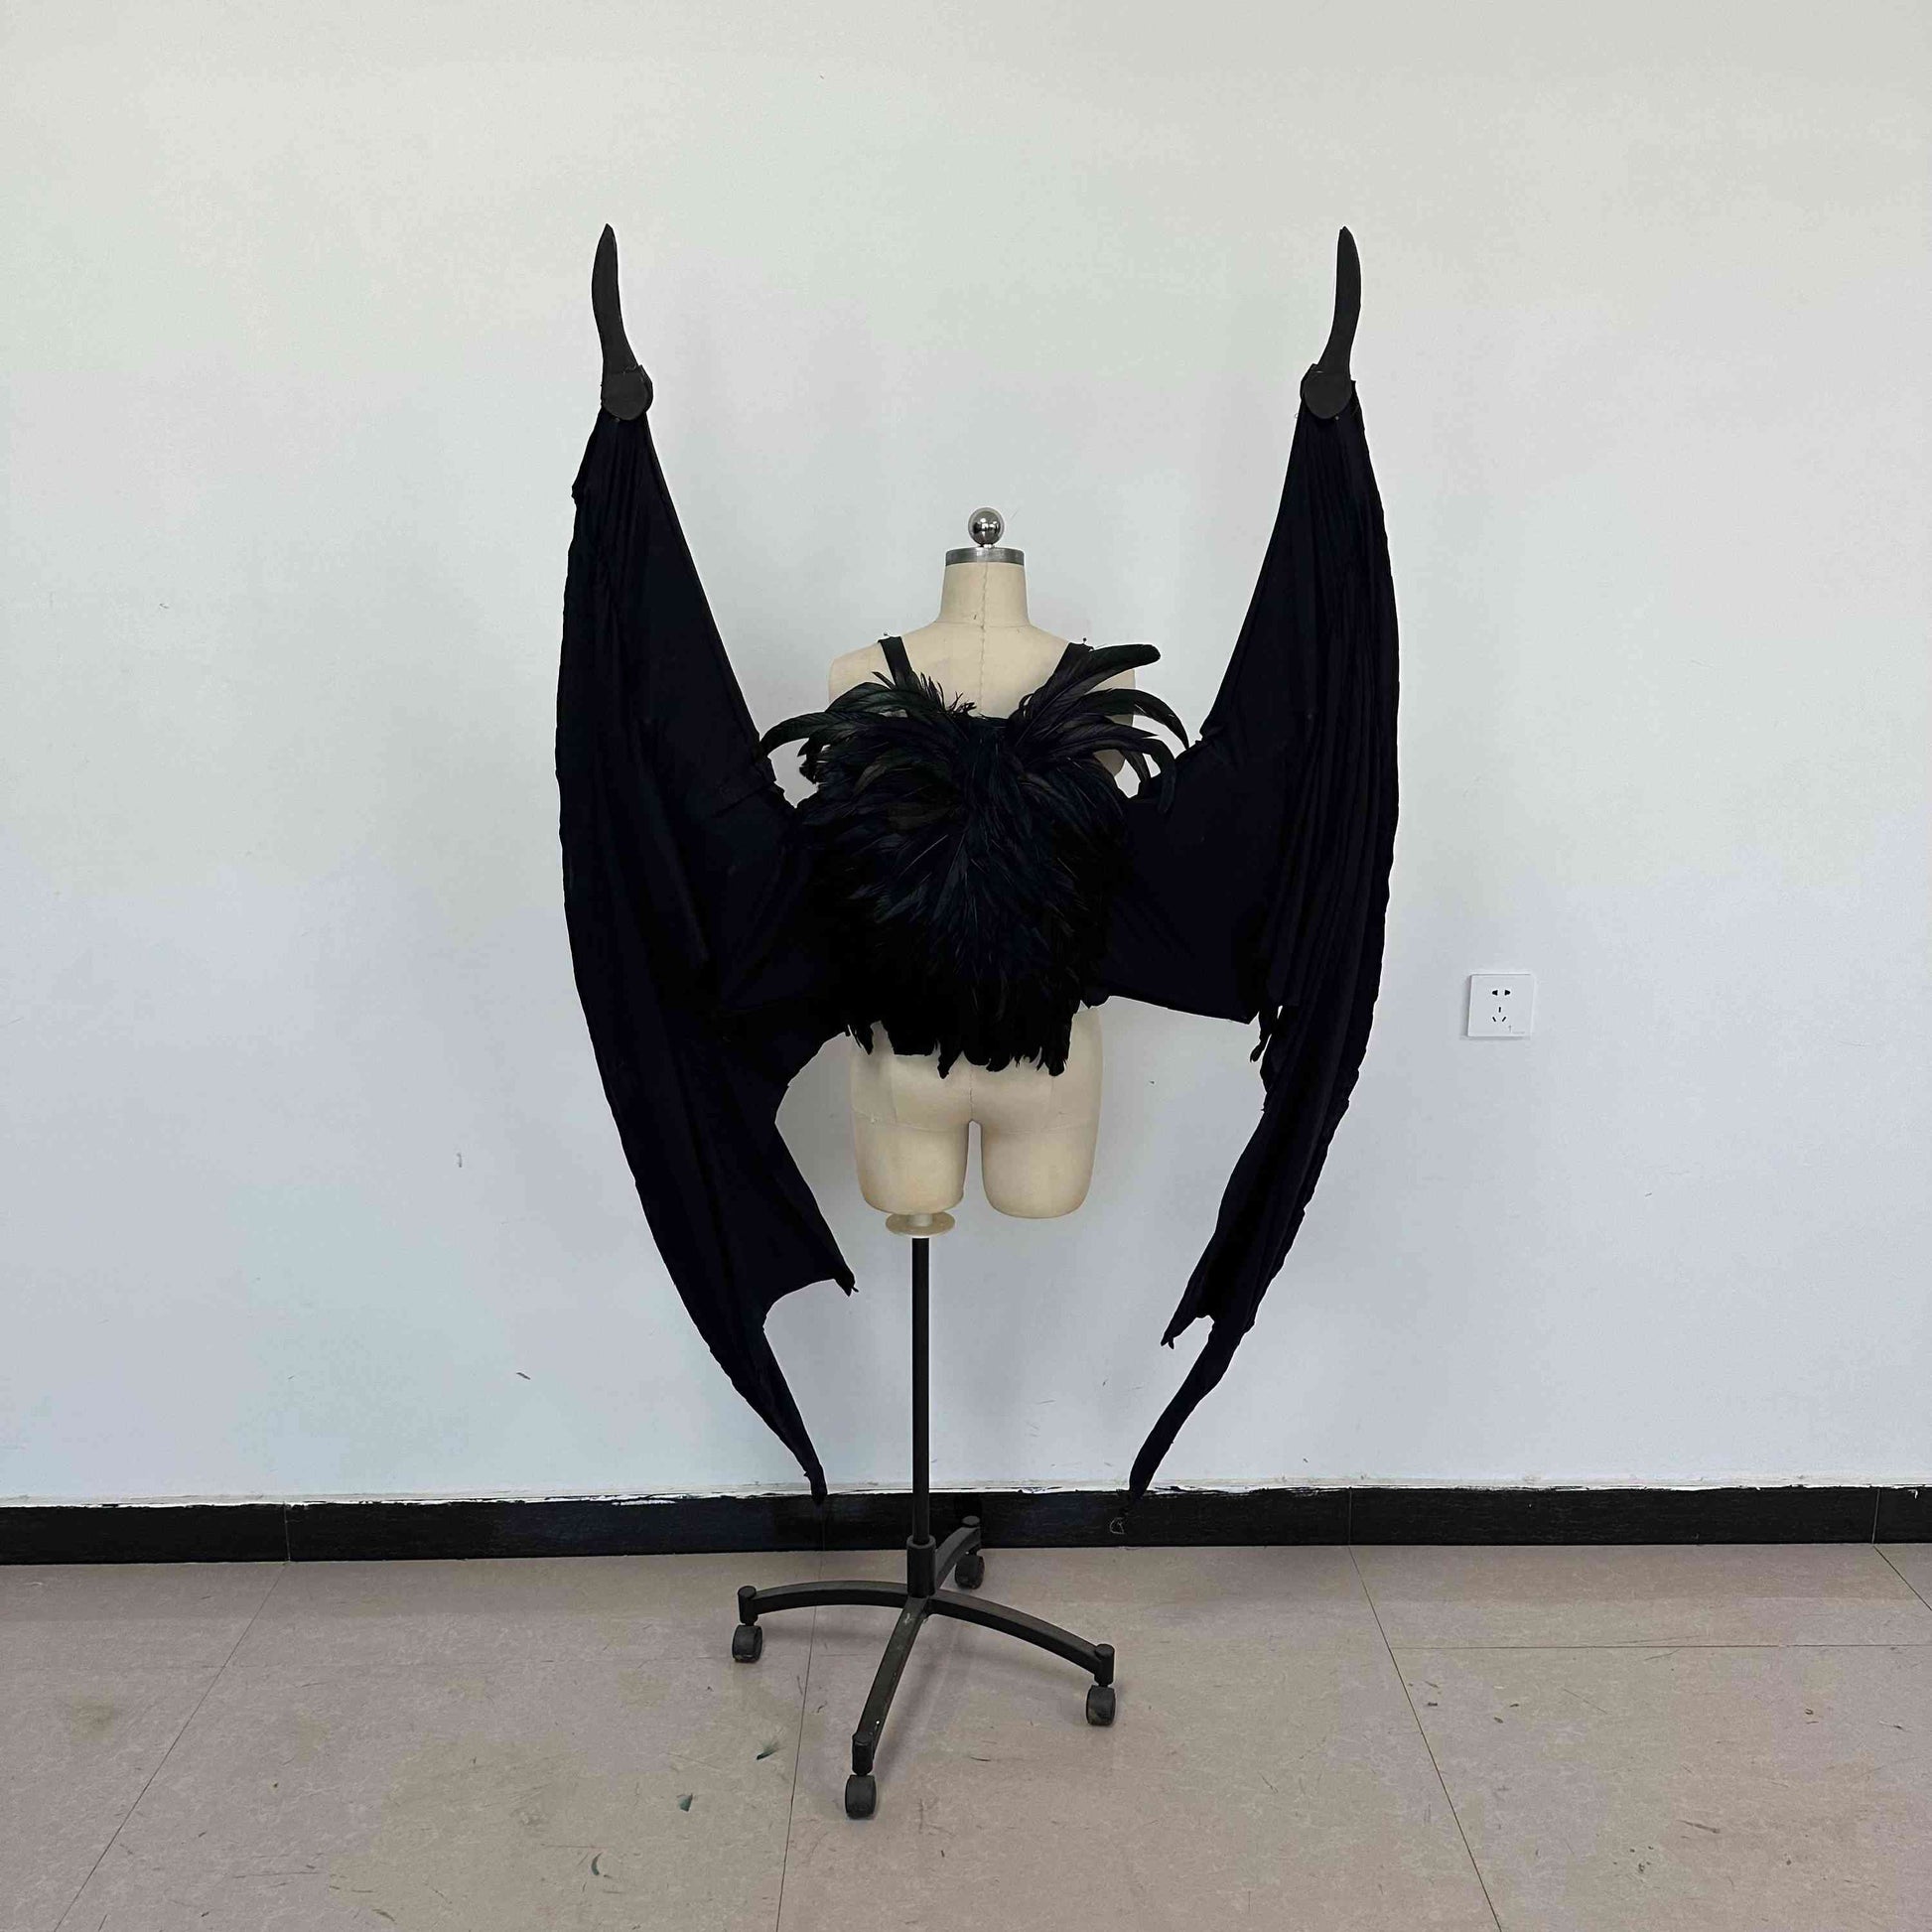 Our large black color devil wings folded from the back. Wings are moveable and can control extension and folding remotely. Made from aluminum alloy and cloth. Wings for fallen angel costume or devil costume. Suitable for fantasy photoshoots or events.